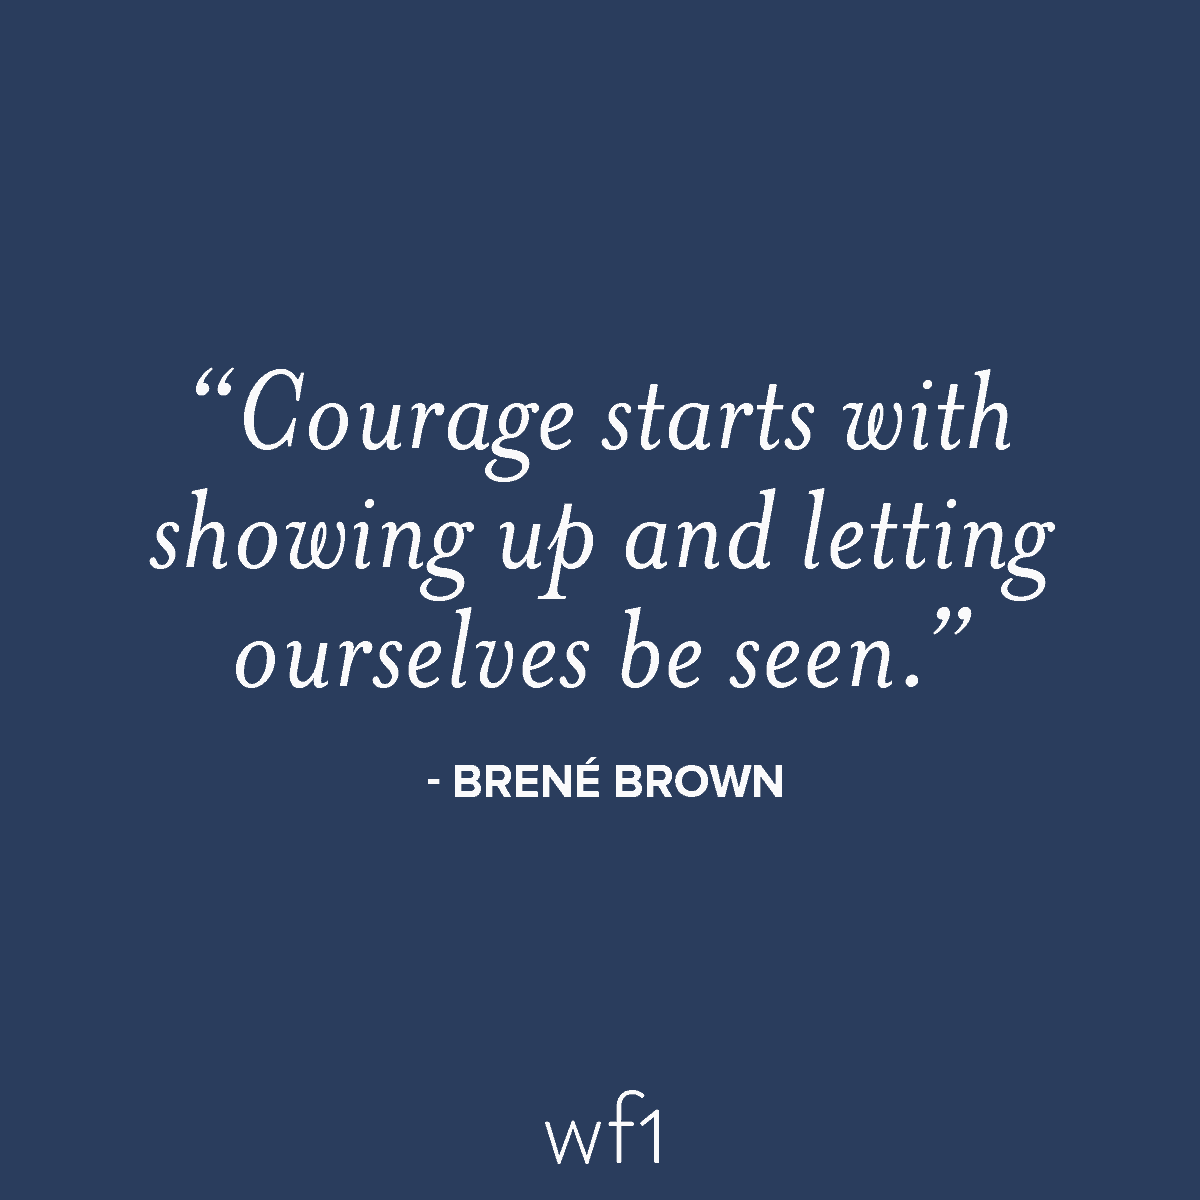 Courage starts with showing up and letting ourselves be seen. - Brene Brown